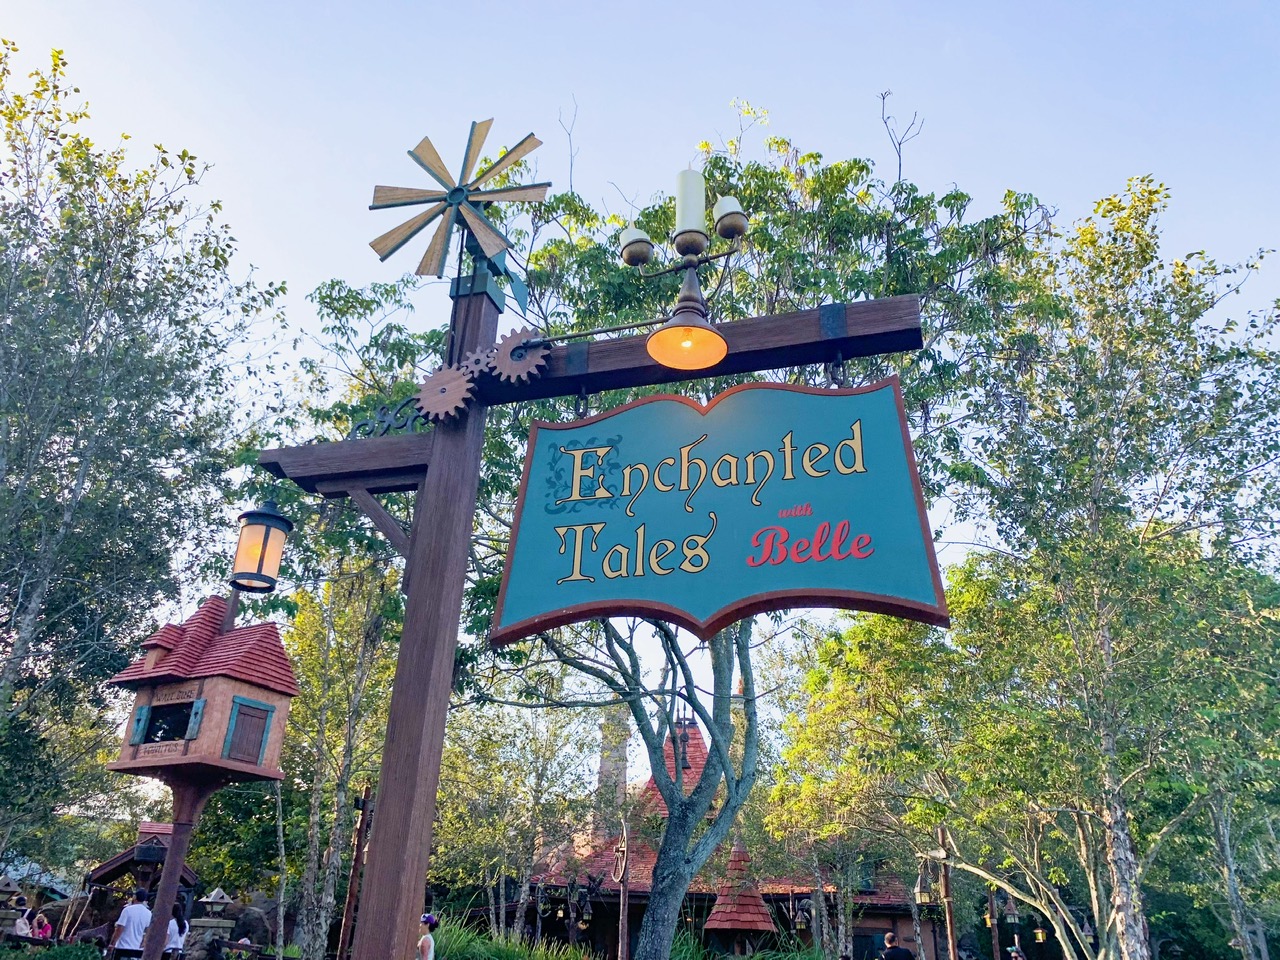 Enchanted Tales with Belle sign